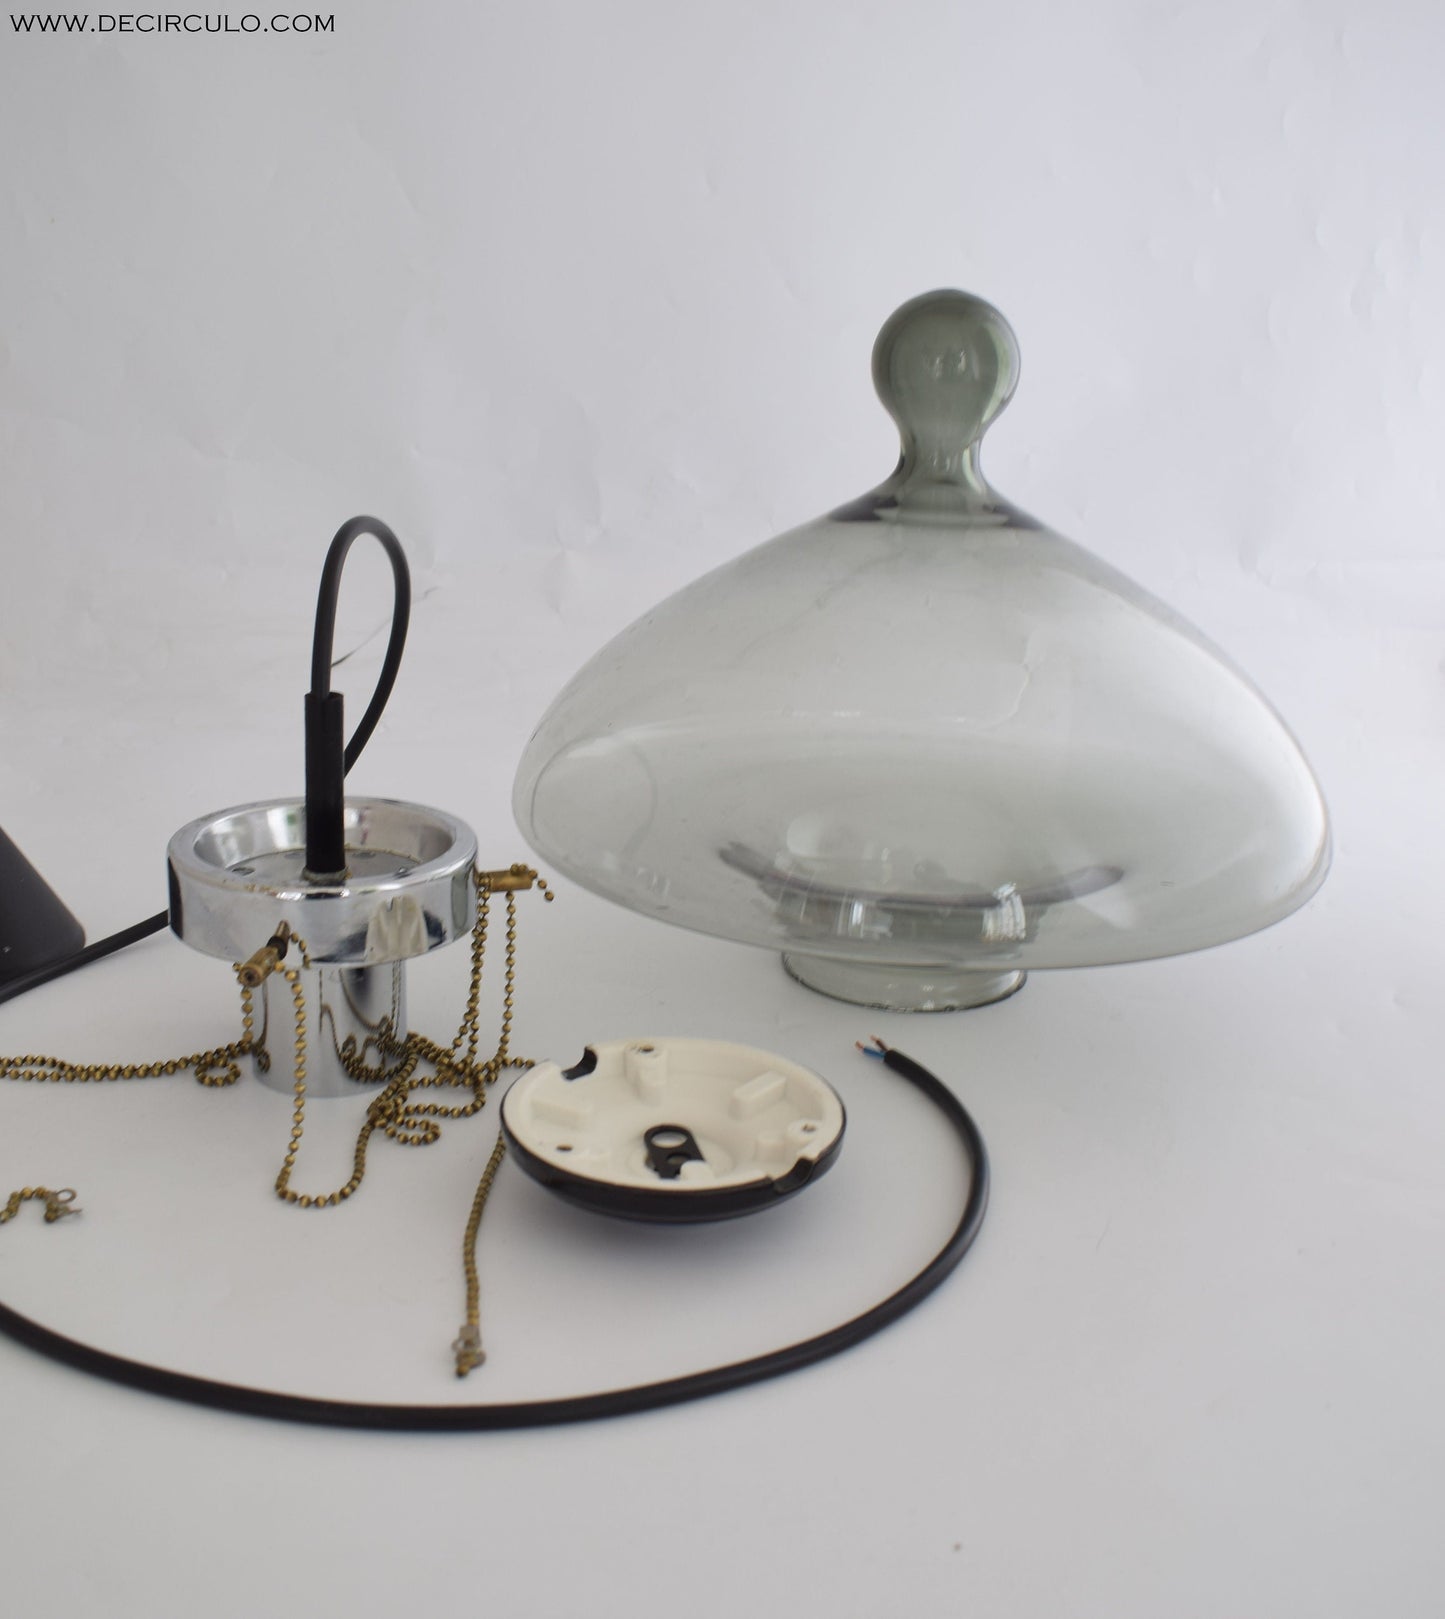 Raak High Chaparral pendant light, dutch vintage design lamp from the 1970s